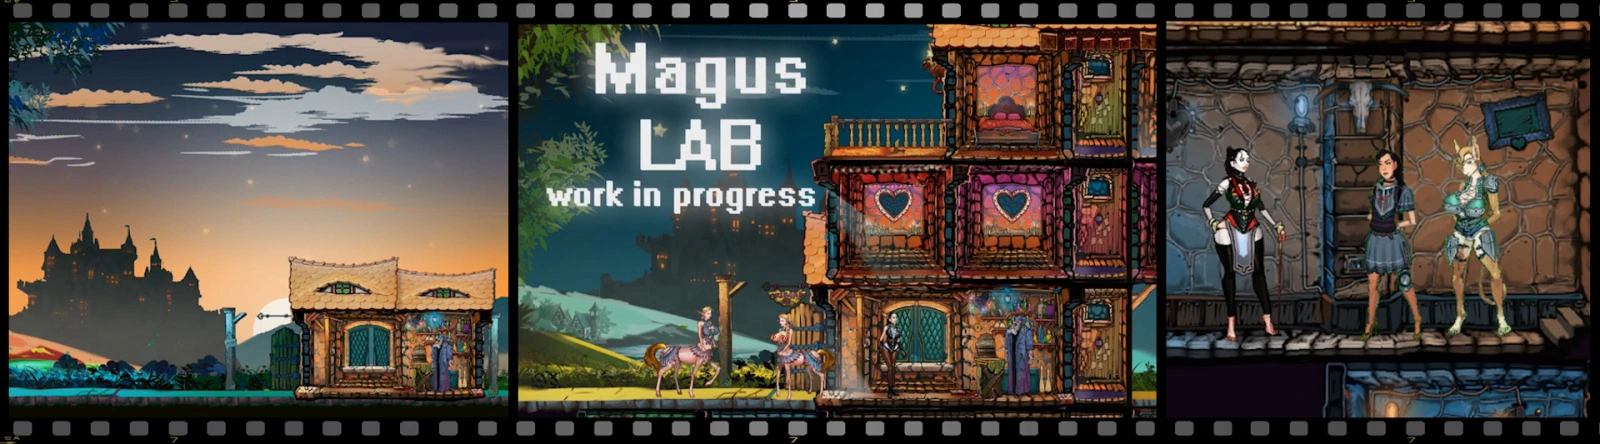 The Magus Lab [v0.41a] main image